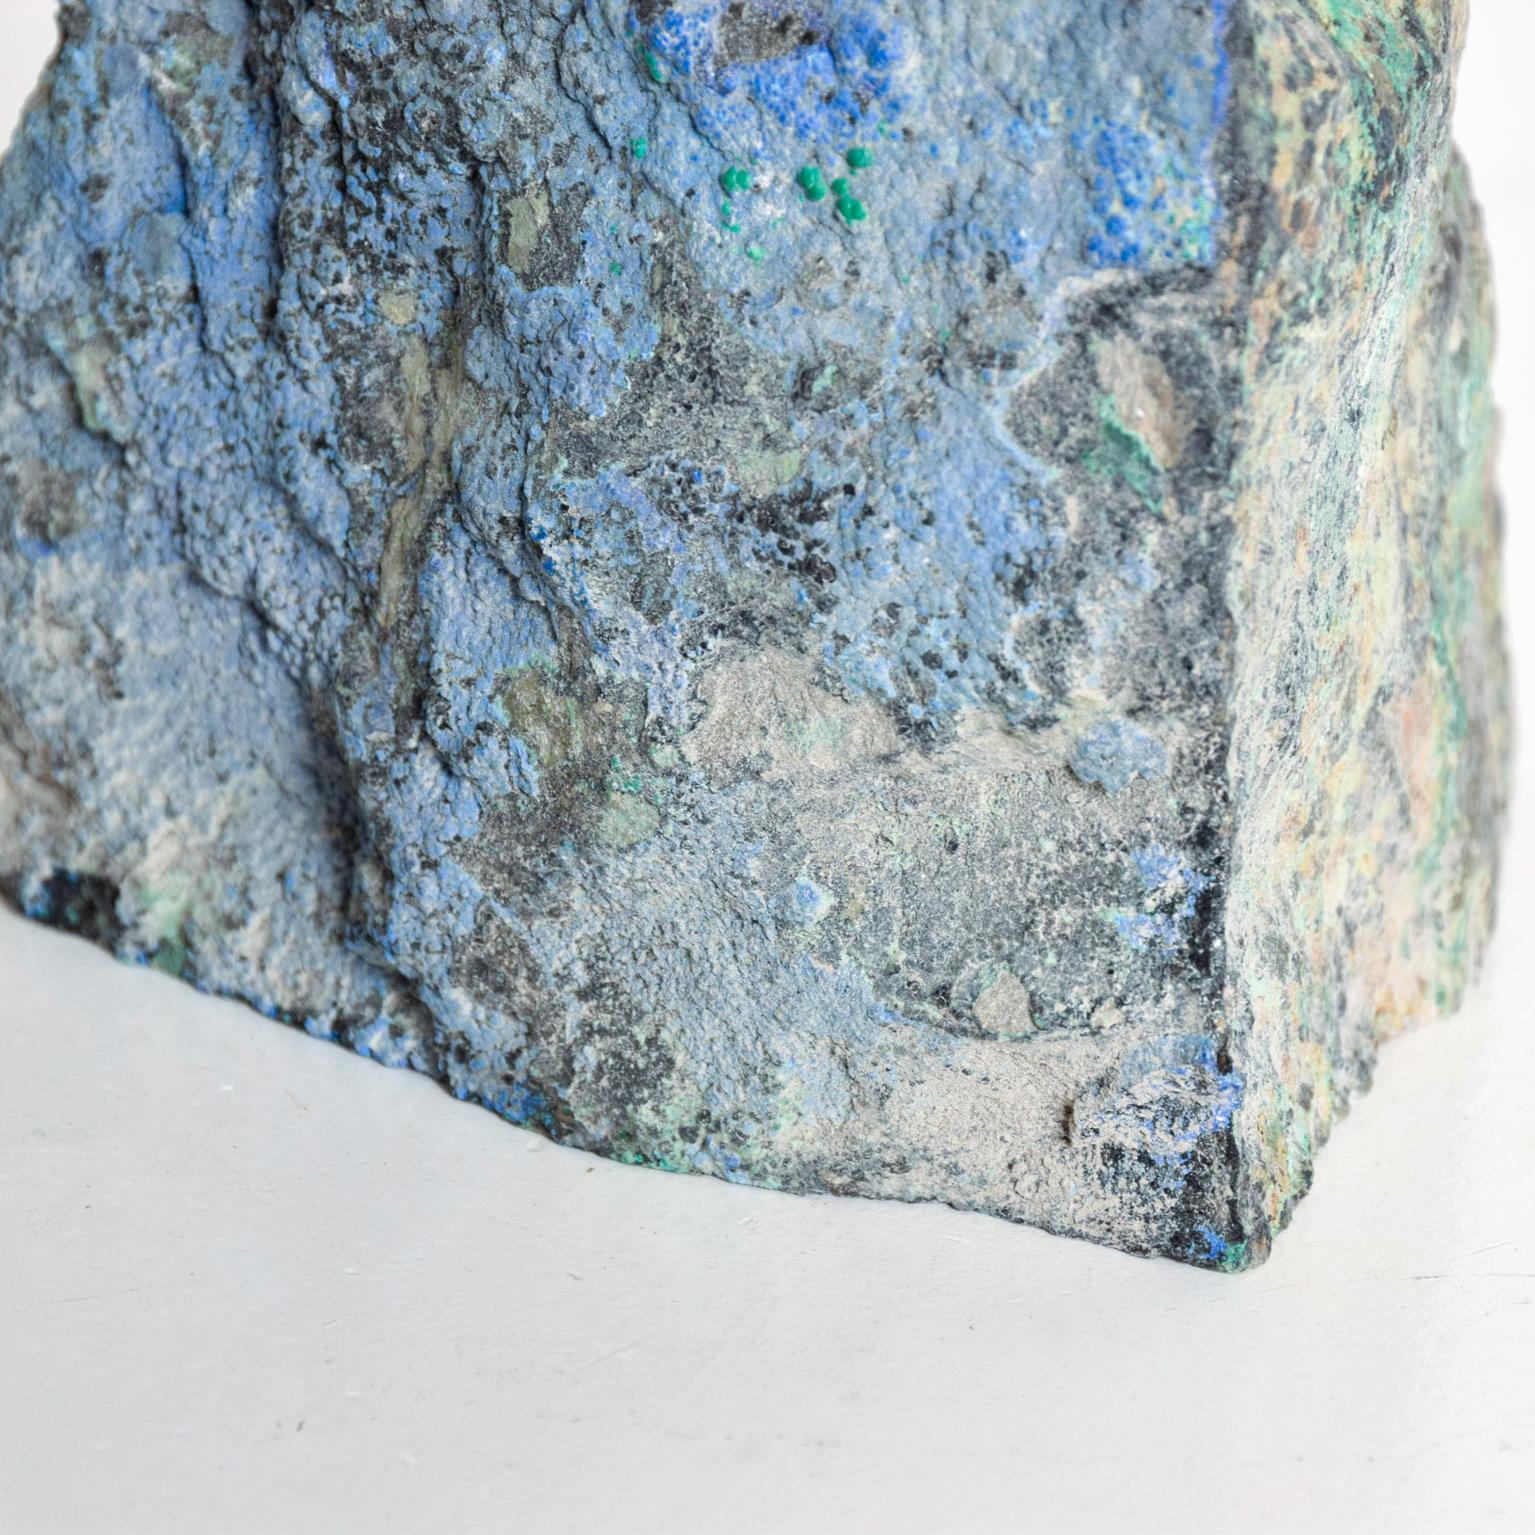 For your consideration: Beautiful Azurite Stone Bookend or Heavy Paper Weight

Mid-Century Modern design

Dimensions are: 8 1/2